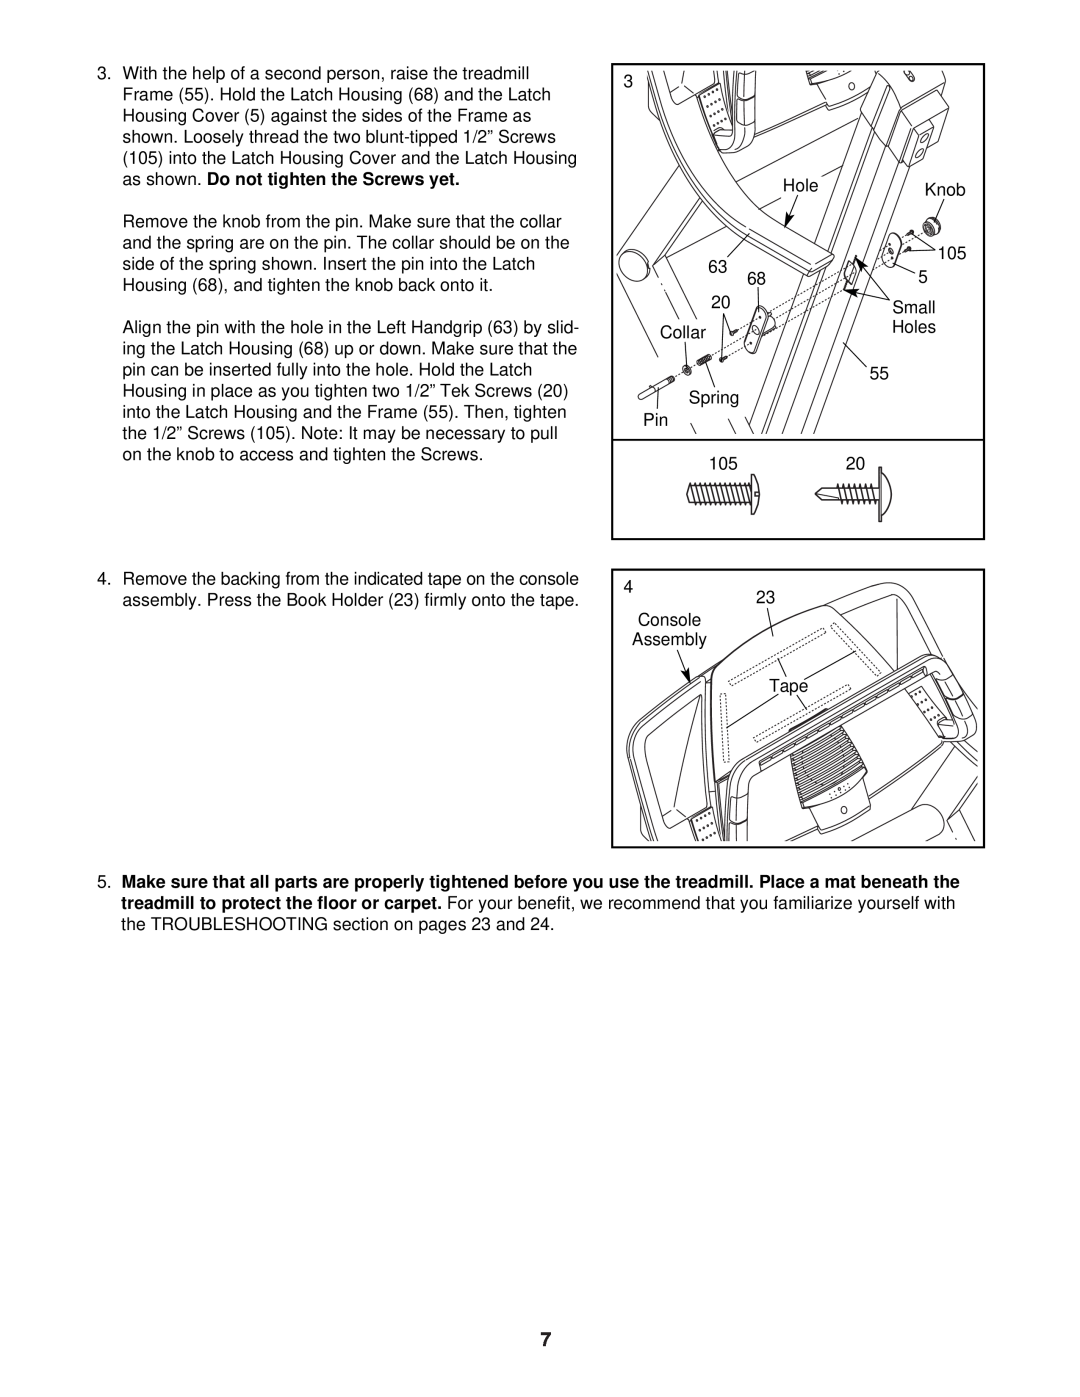 ProForm PFTL91330 user manual as shown. Do not tighten the Screws yet, Assembly 